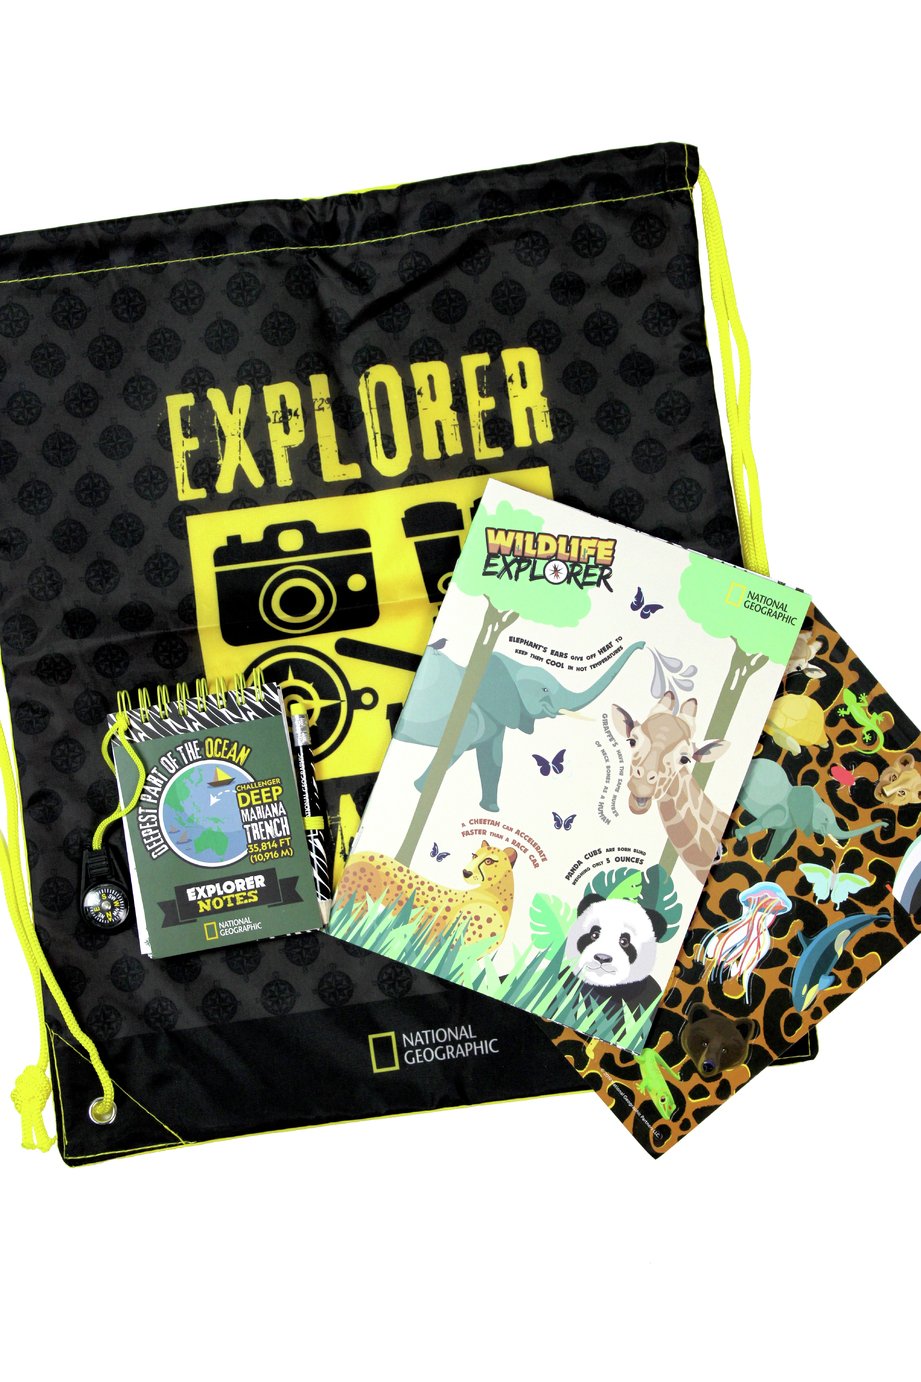 National Geographic Explorer Set Review